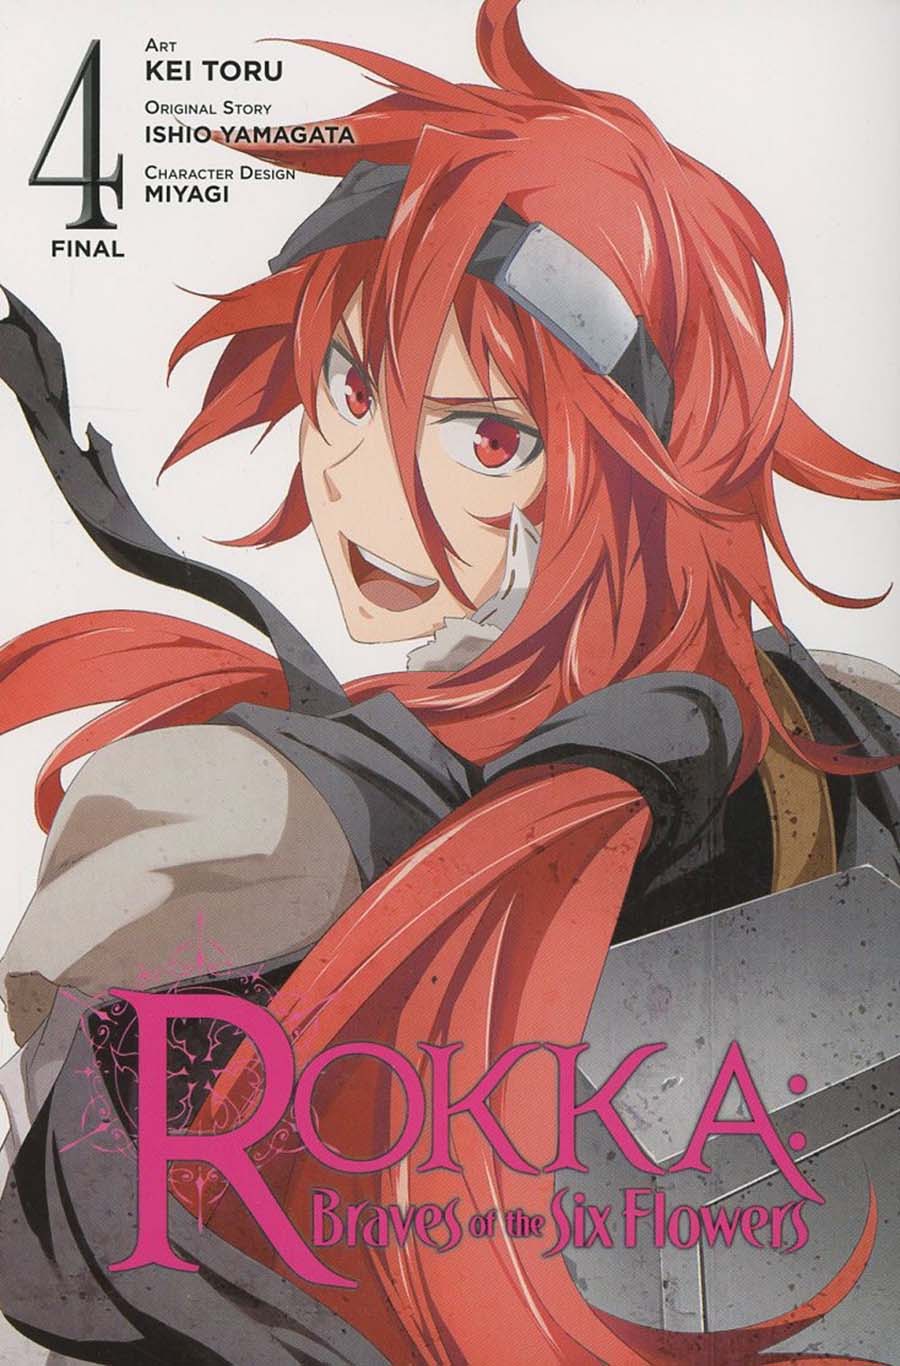 Rokka Braves Of The Six Flowers Vol 4 GN